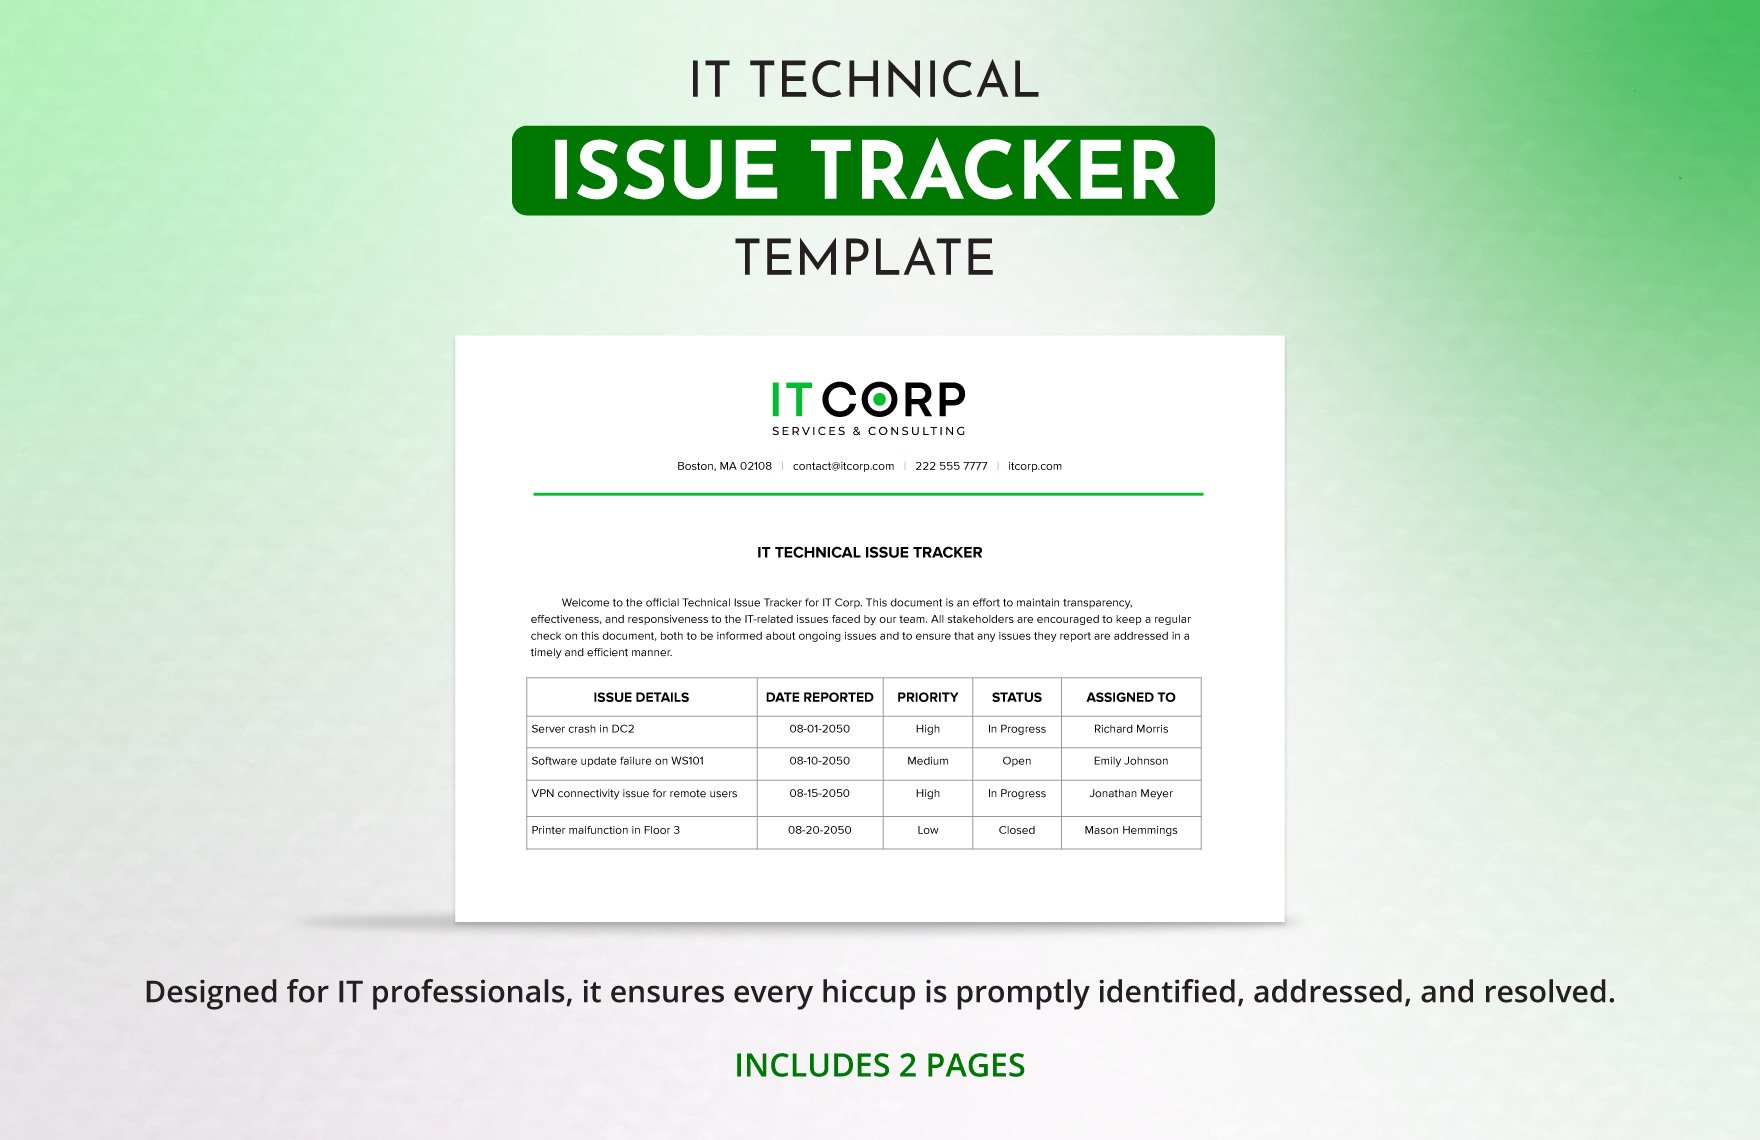 IT Technical Issue Tracker Template